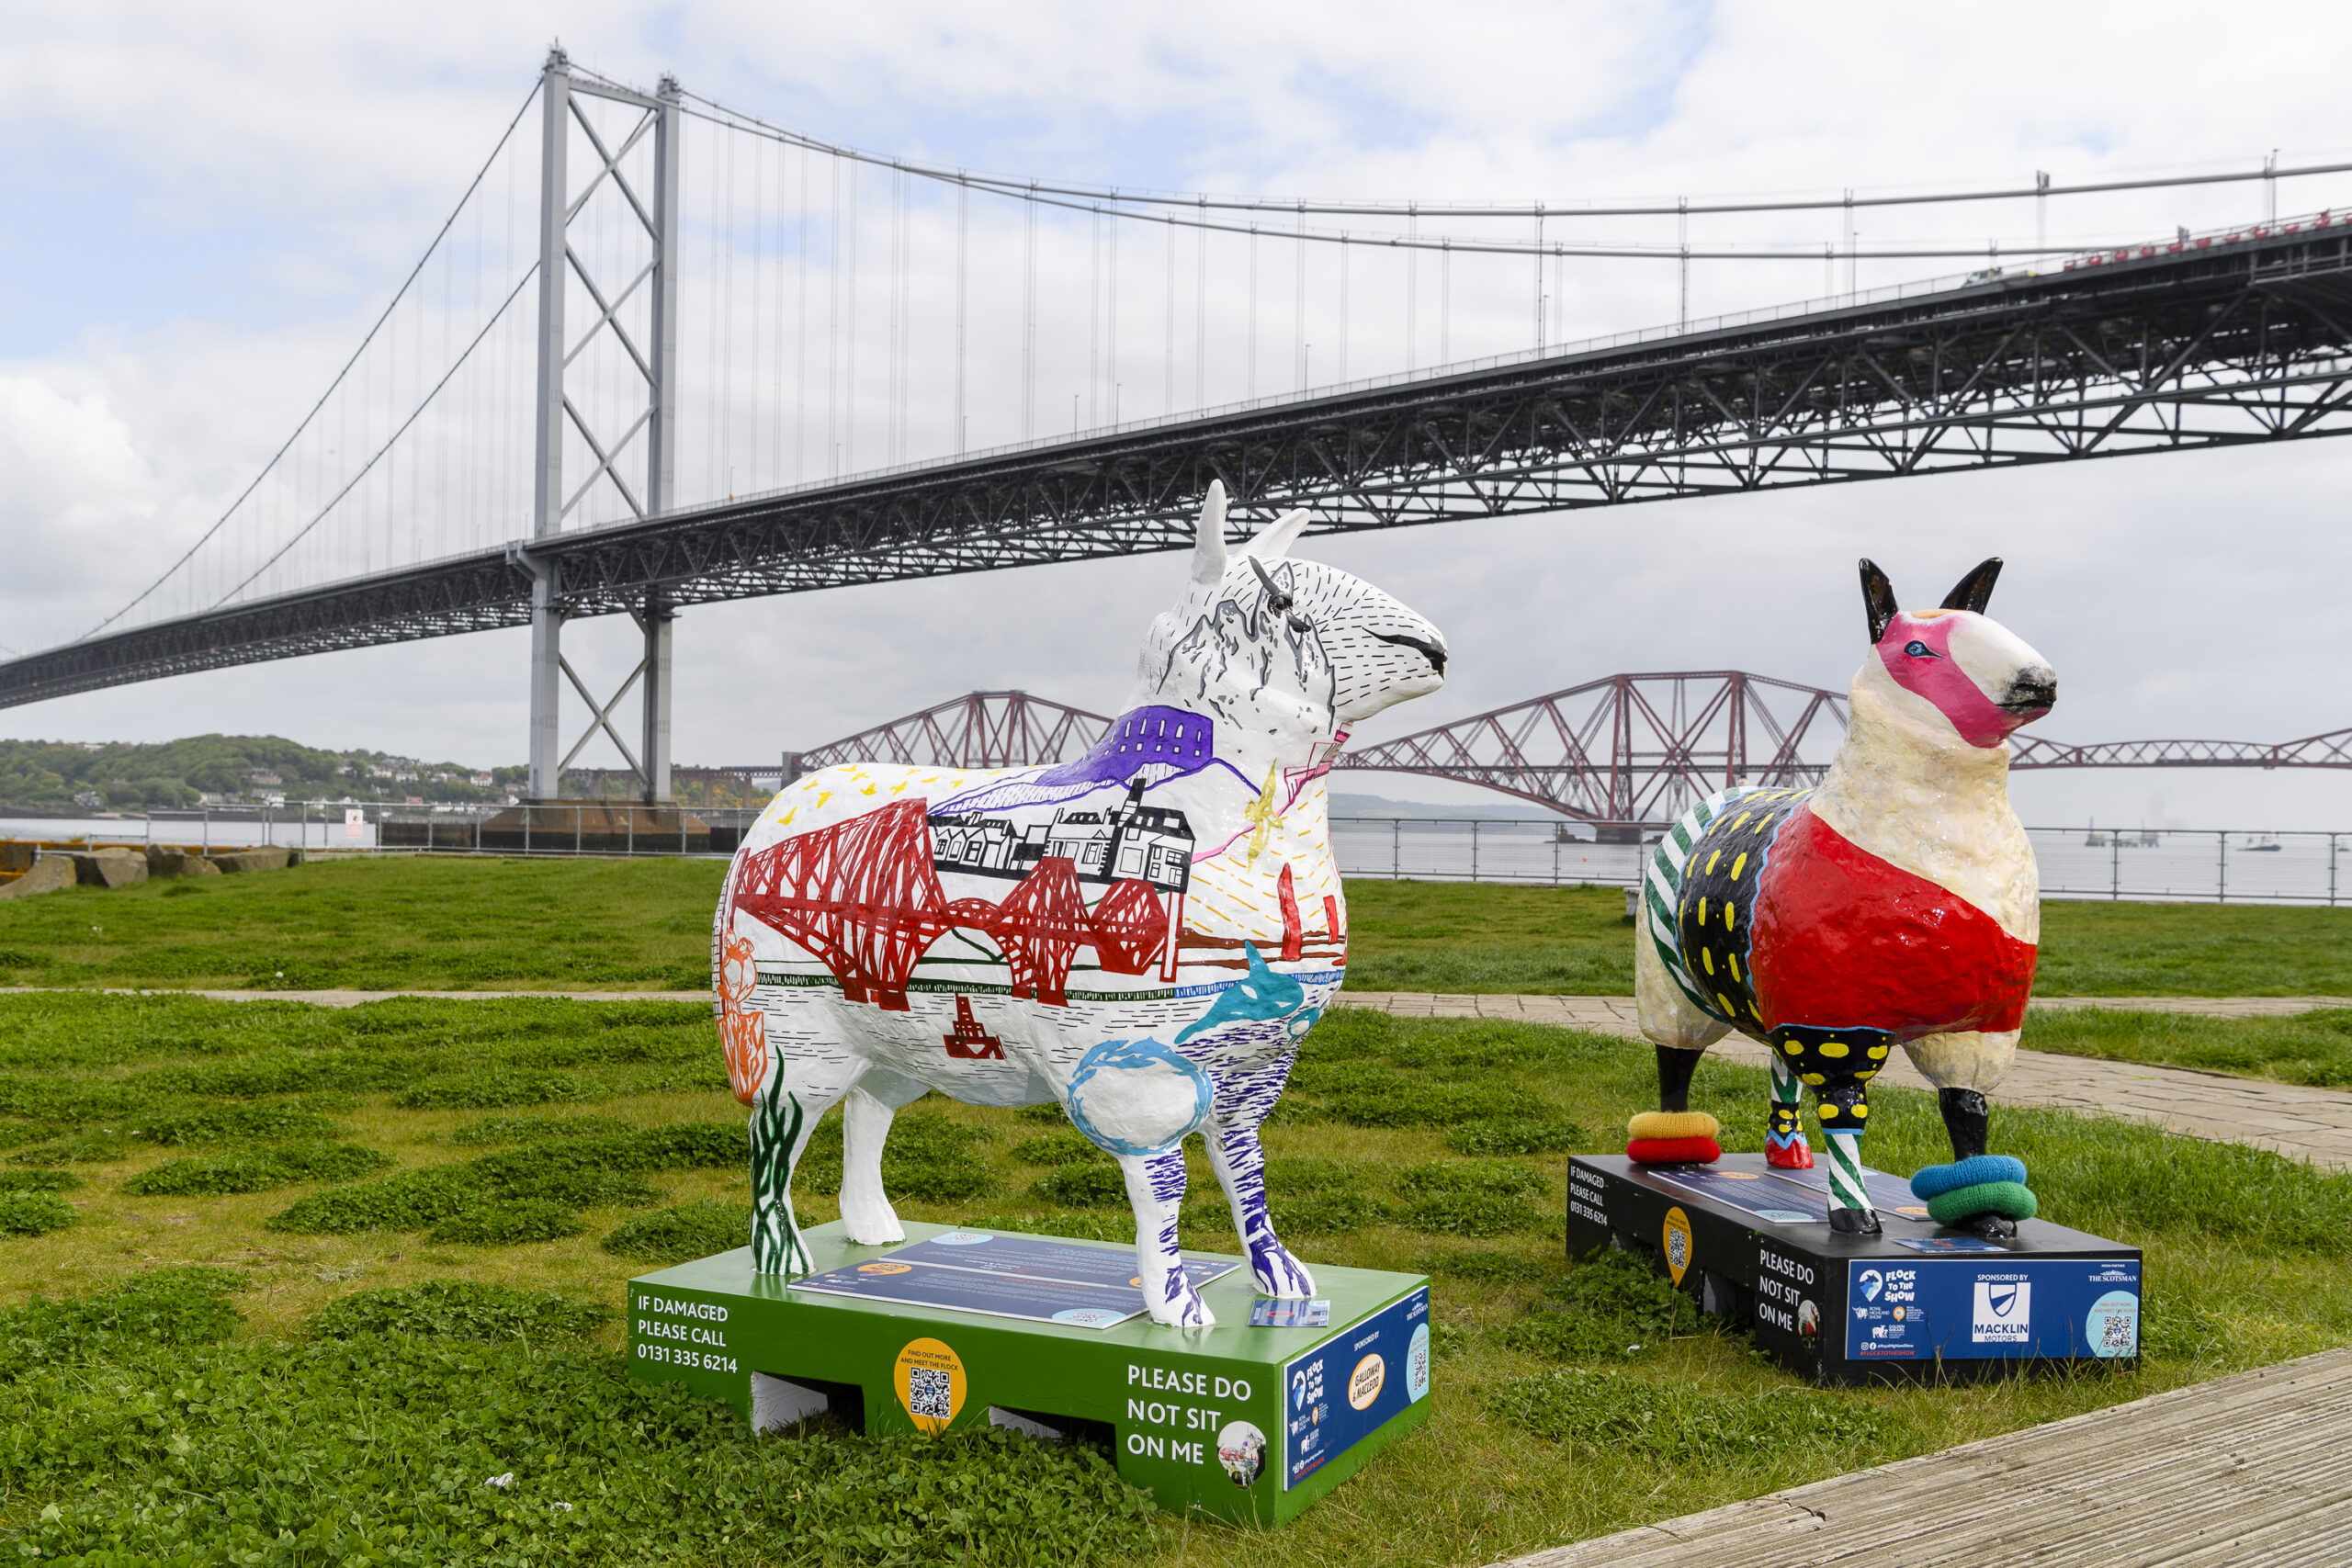 **Pics free to use**
Port Edgar
Flock to the Show, the Royal Highland Show Flock are in their final locations of the nationwide art trail and will be in Edinburgh, the Lothians, and the Scottish Borders from 17 May - 4 June. Royal Highland Show takes place 22 - 25 June 2023."